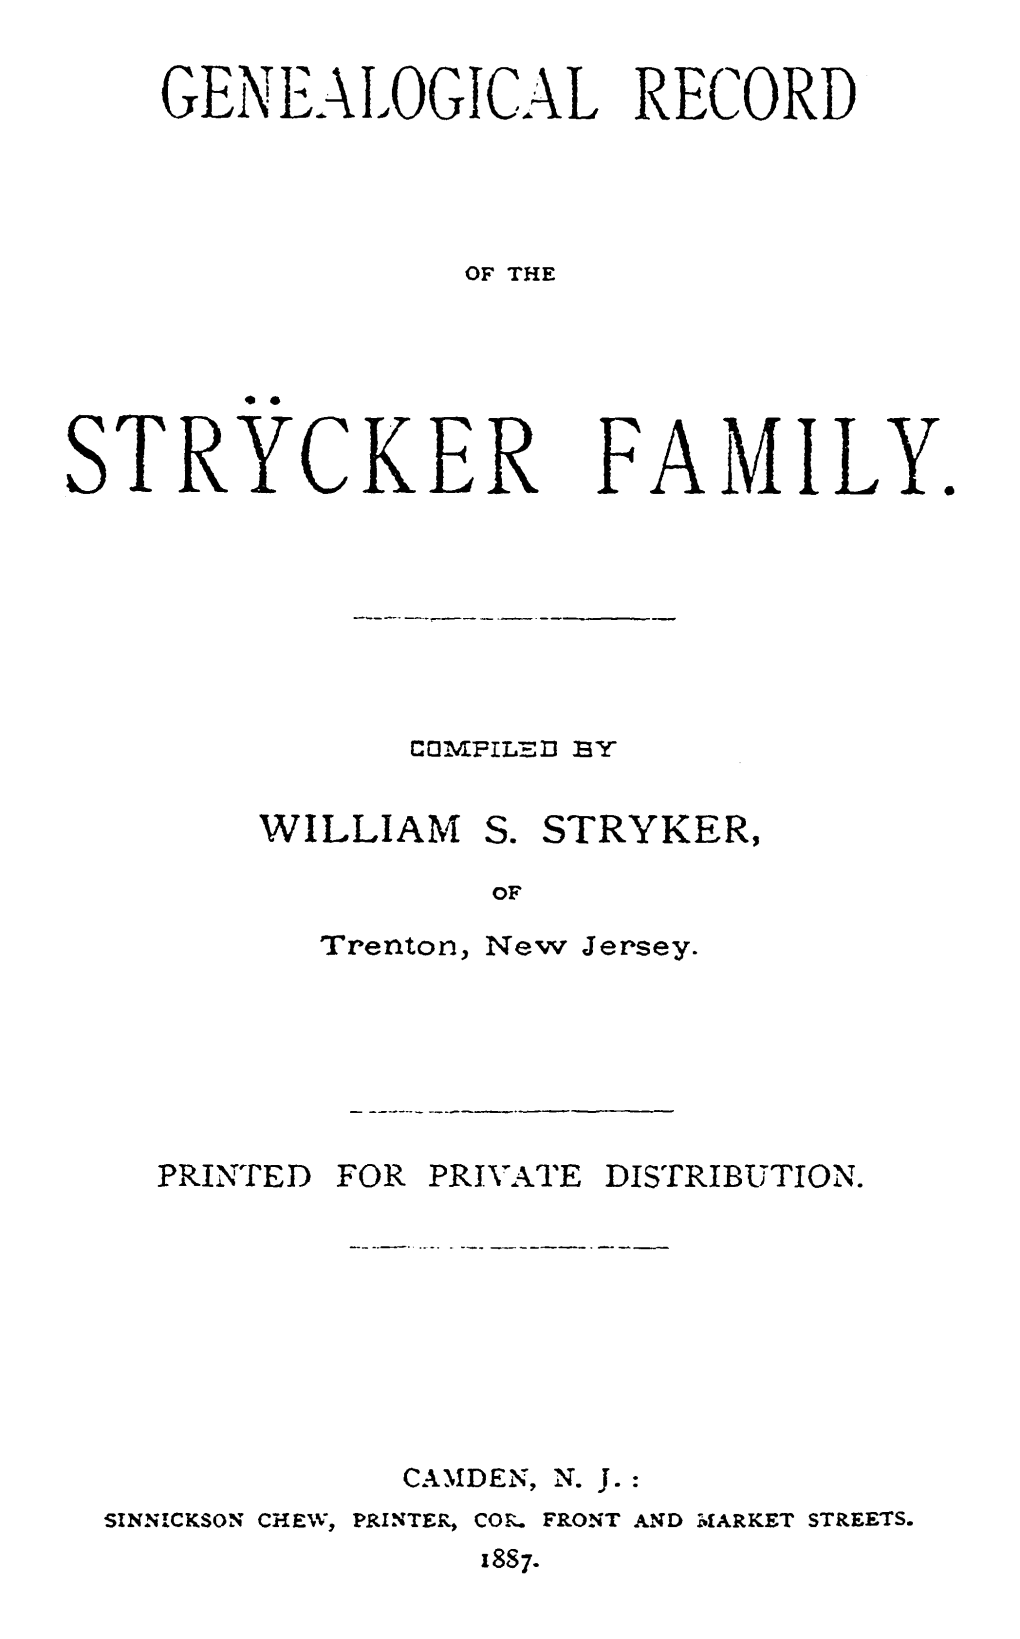 John Stryker Wa-; Buried in the Middle of a Fifteen Acre Field on His Own Farn1, and the Inscription on the Stone Reads